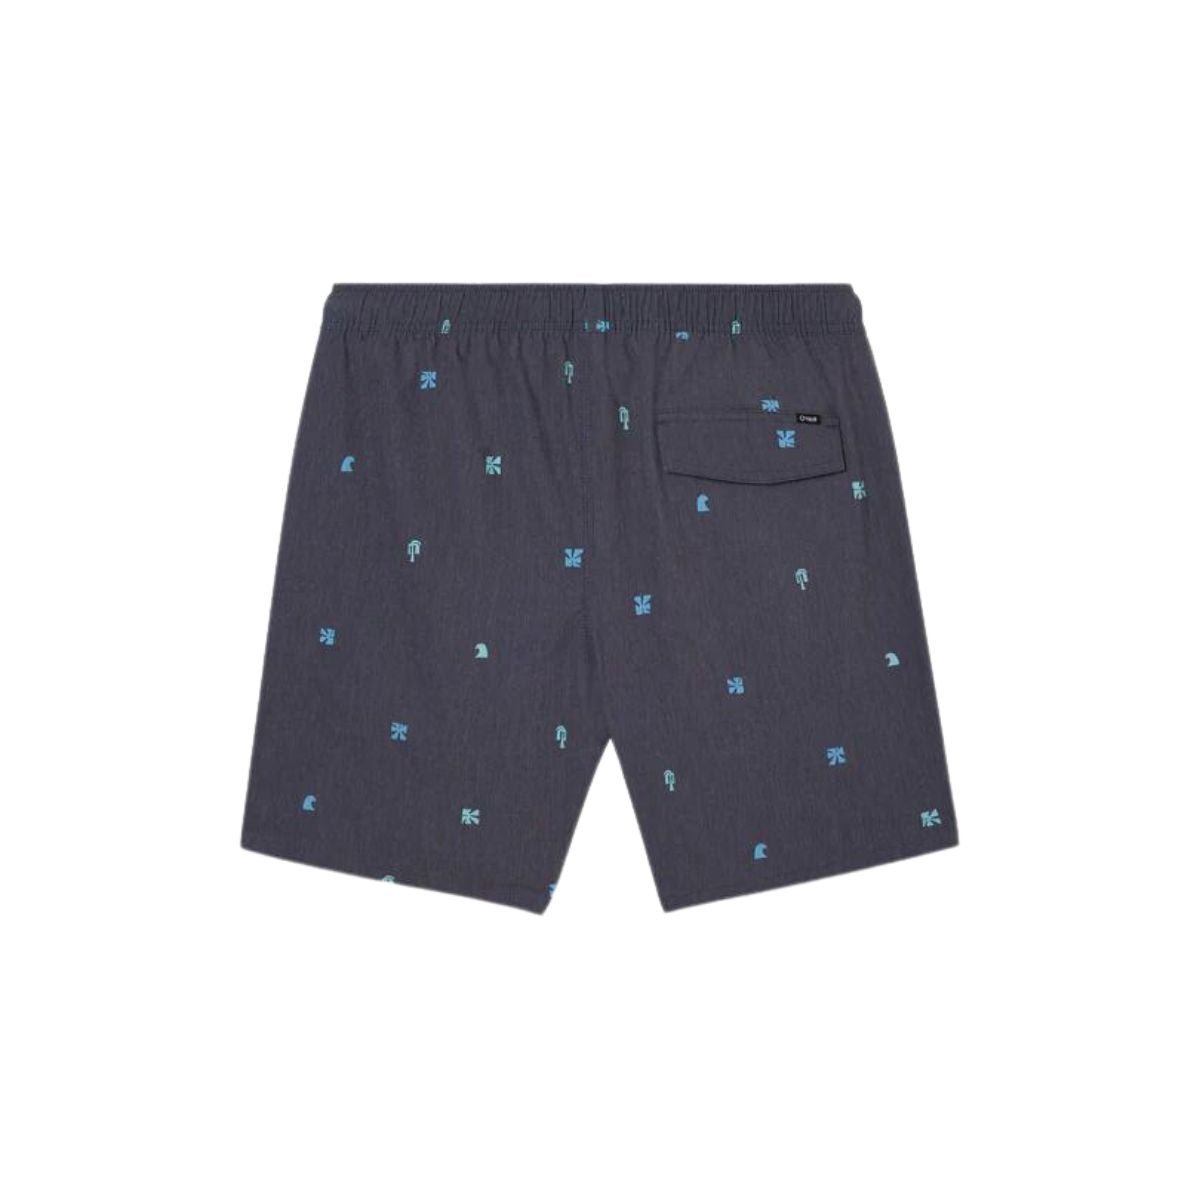 O'Neill OG Volley 17" Boardshorts in Graphite - BoardCo